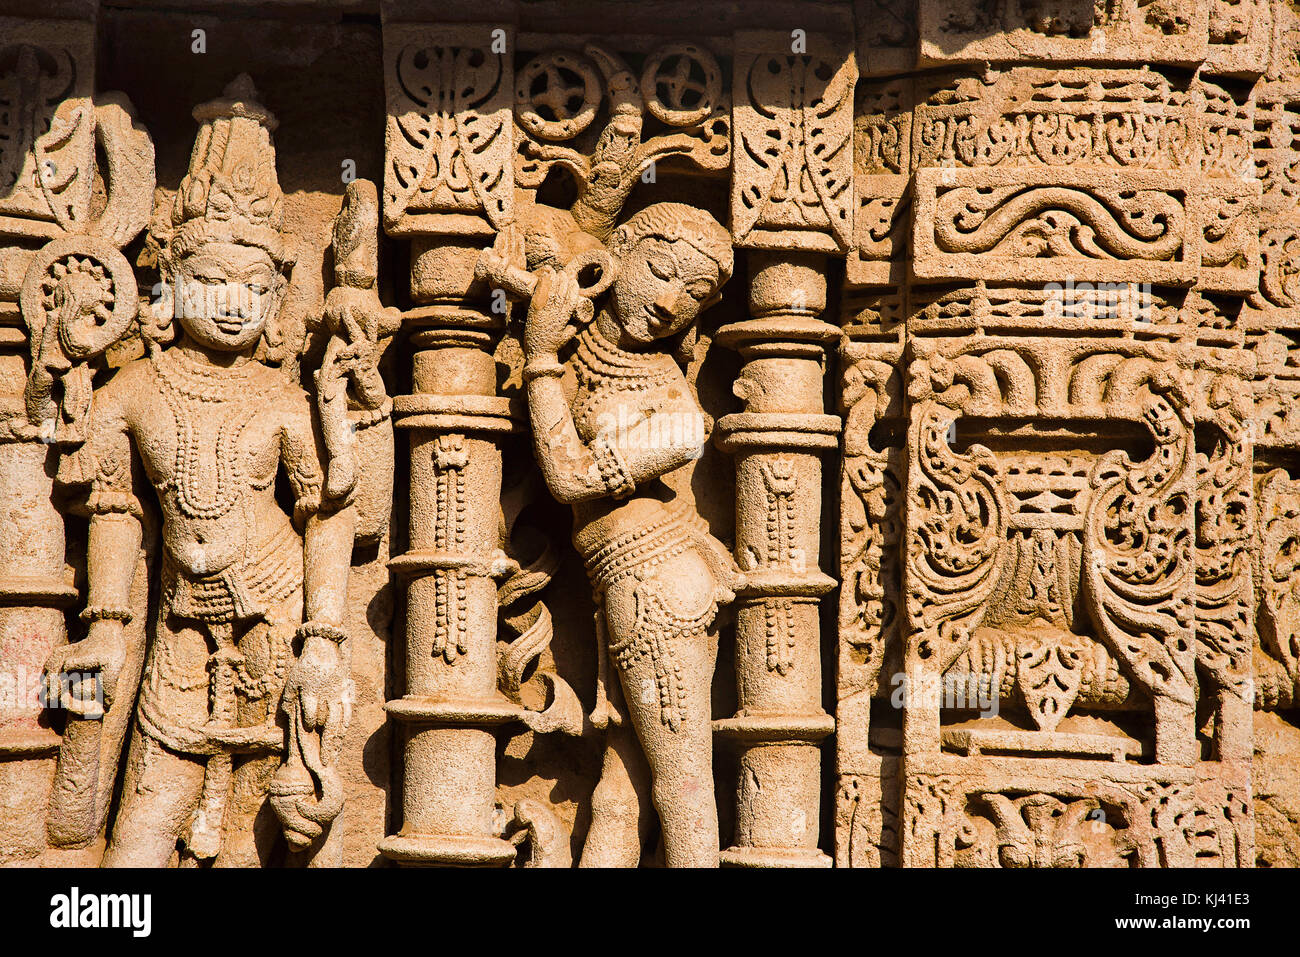 Carved idols on the inner wall of Rani ki vav, an intricately constructed step well. Patan in Gujarat, India. Stock Photo